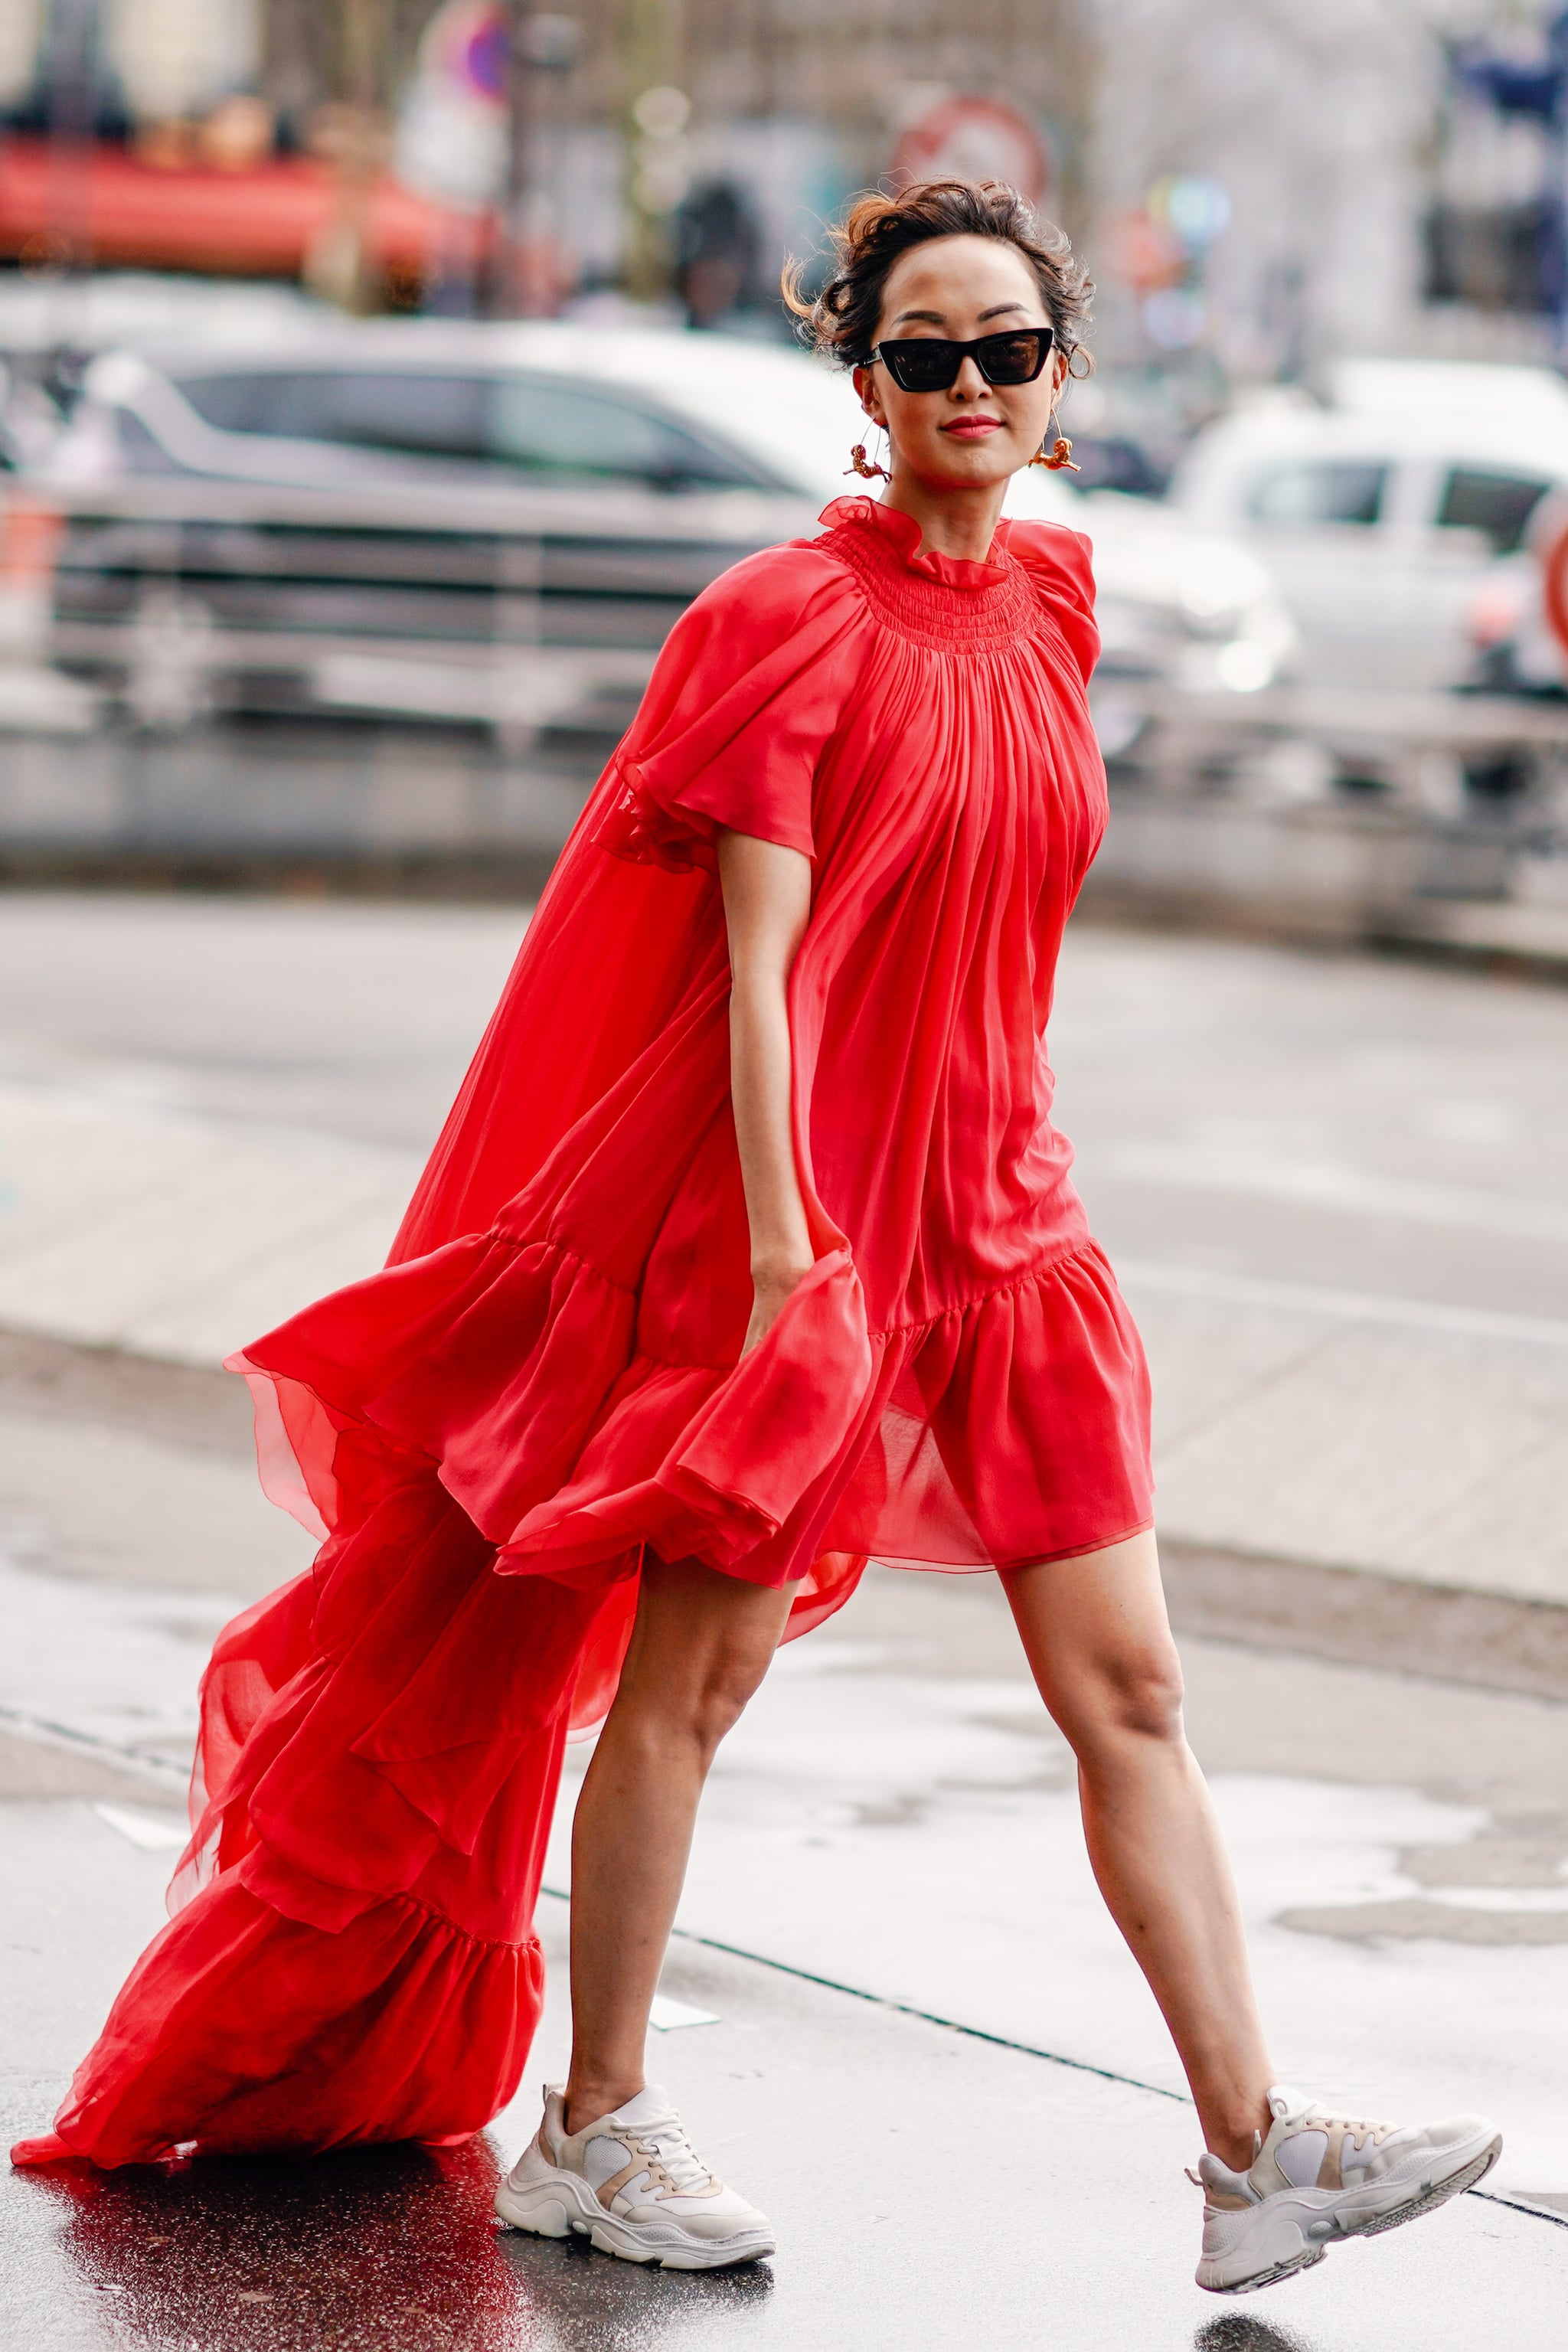 How to Wear a Dress With Sneakers For Summer 2019 | POPSUGAR Fashion